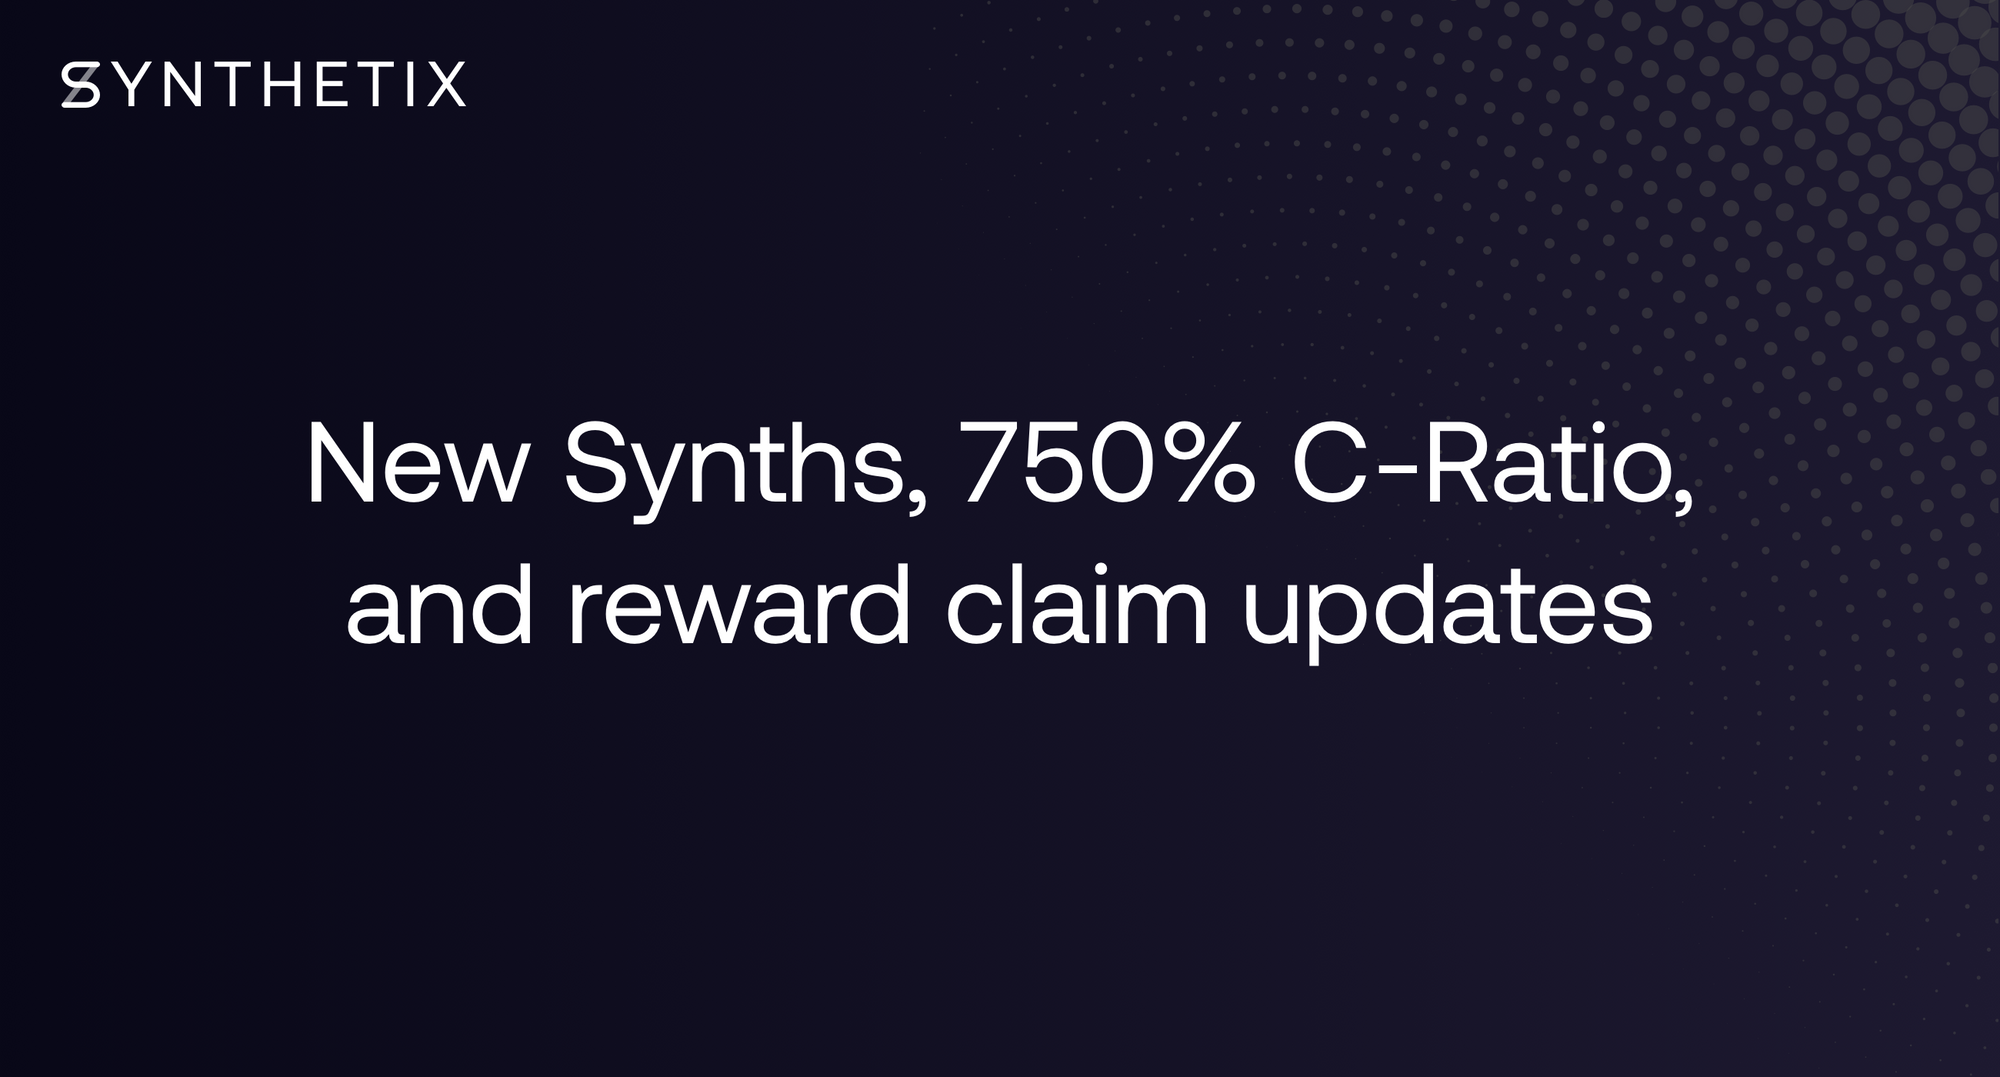 New crypto Synths, 750% C-Ratio, and reward claim updates!